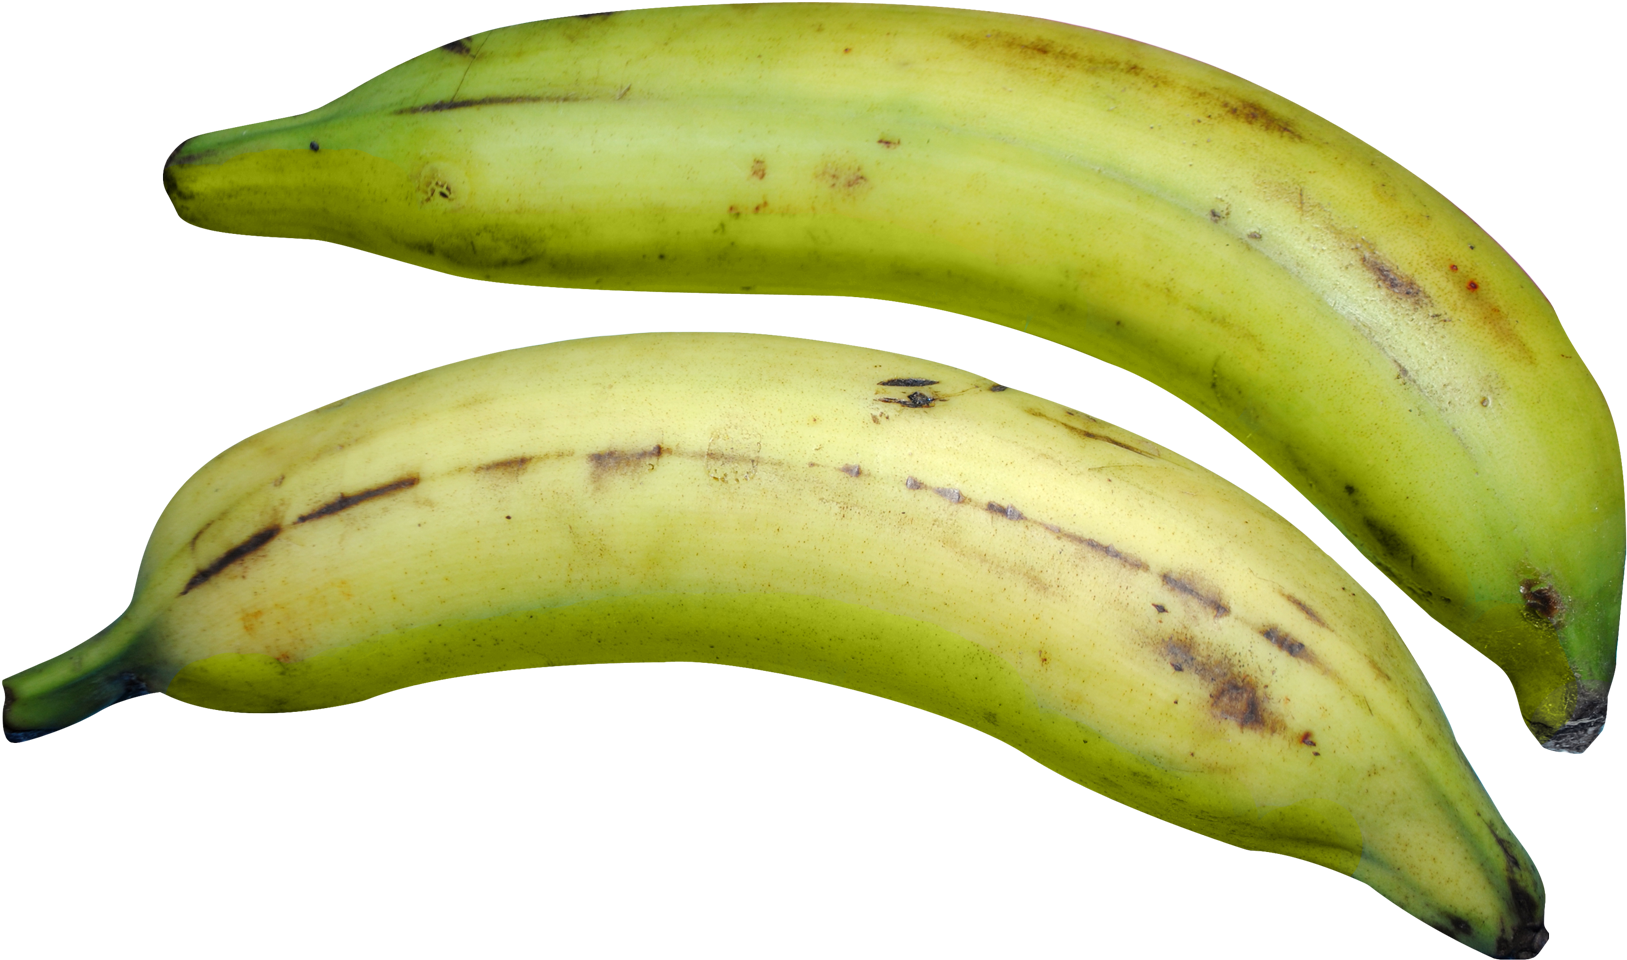 Two Bananas On A Black Background